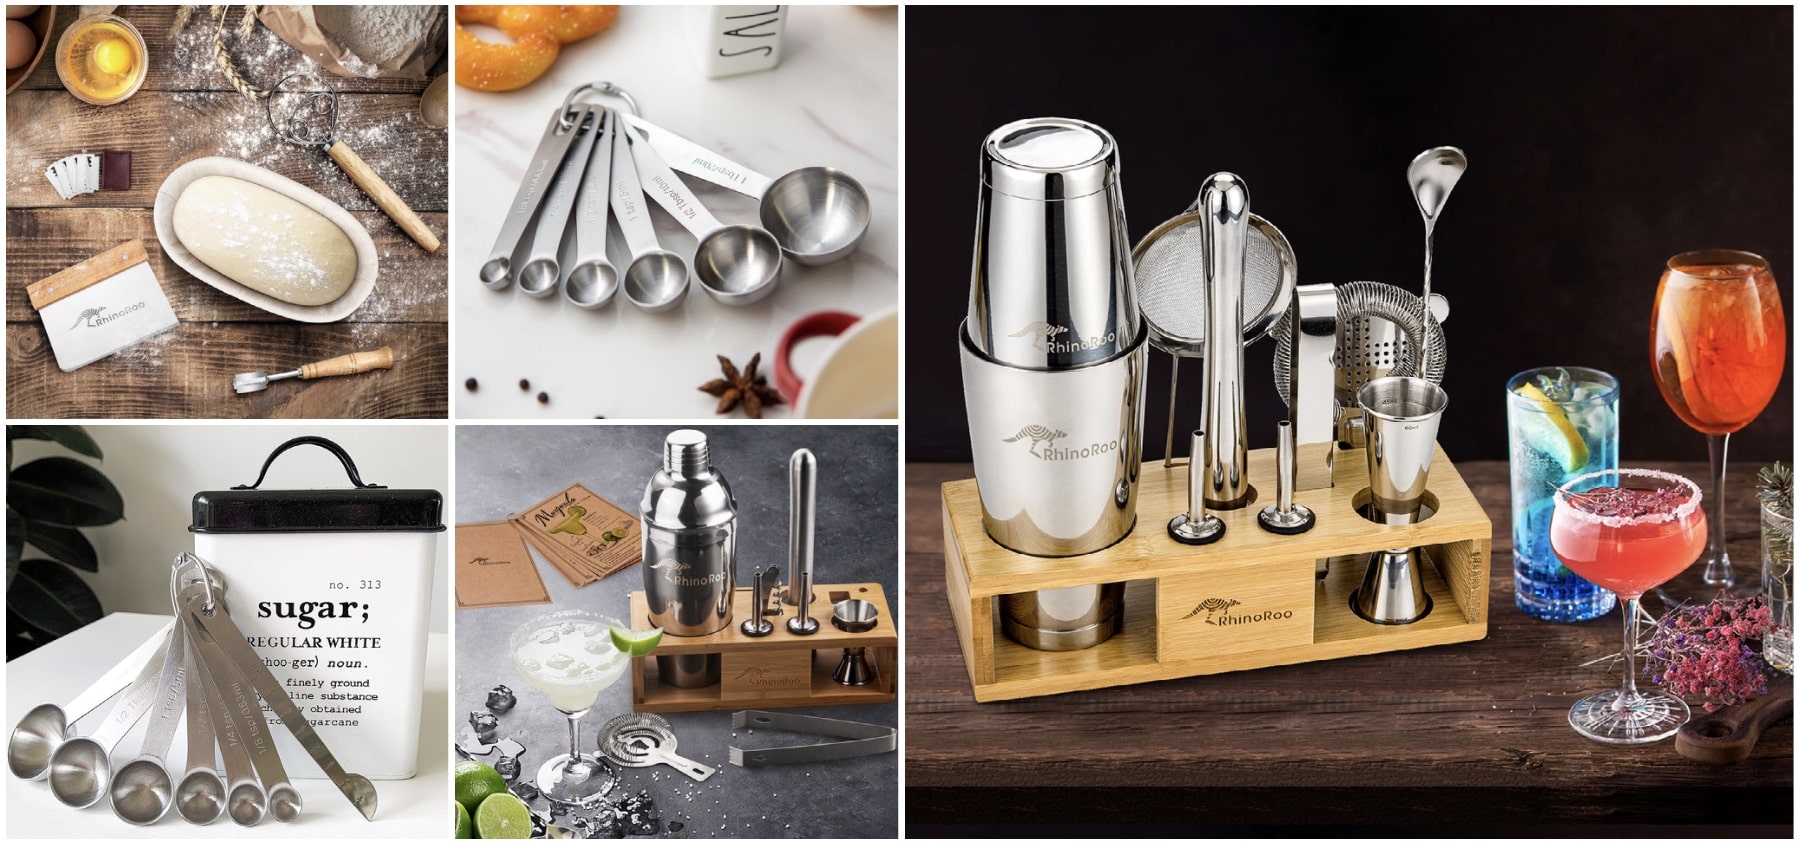 RhinoRoo Product Collection - Cocktail Shaker Sets, Bread Proofing Basket Kit, Measuring Spoons